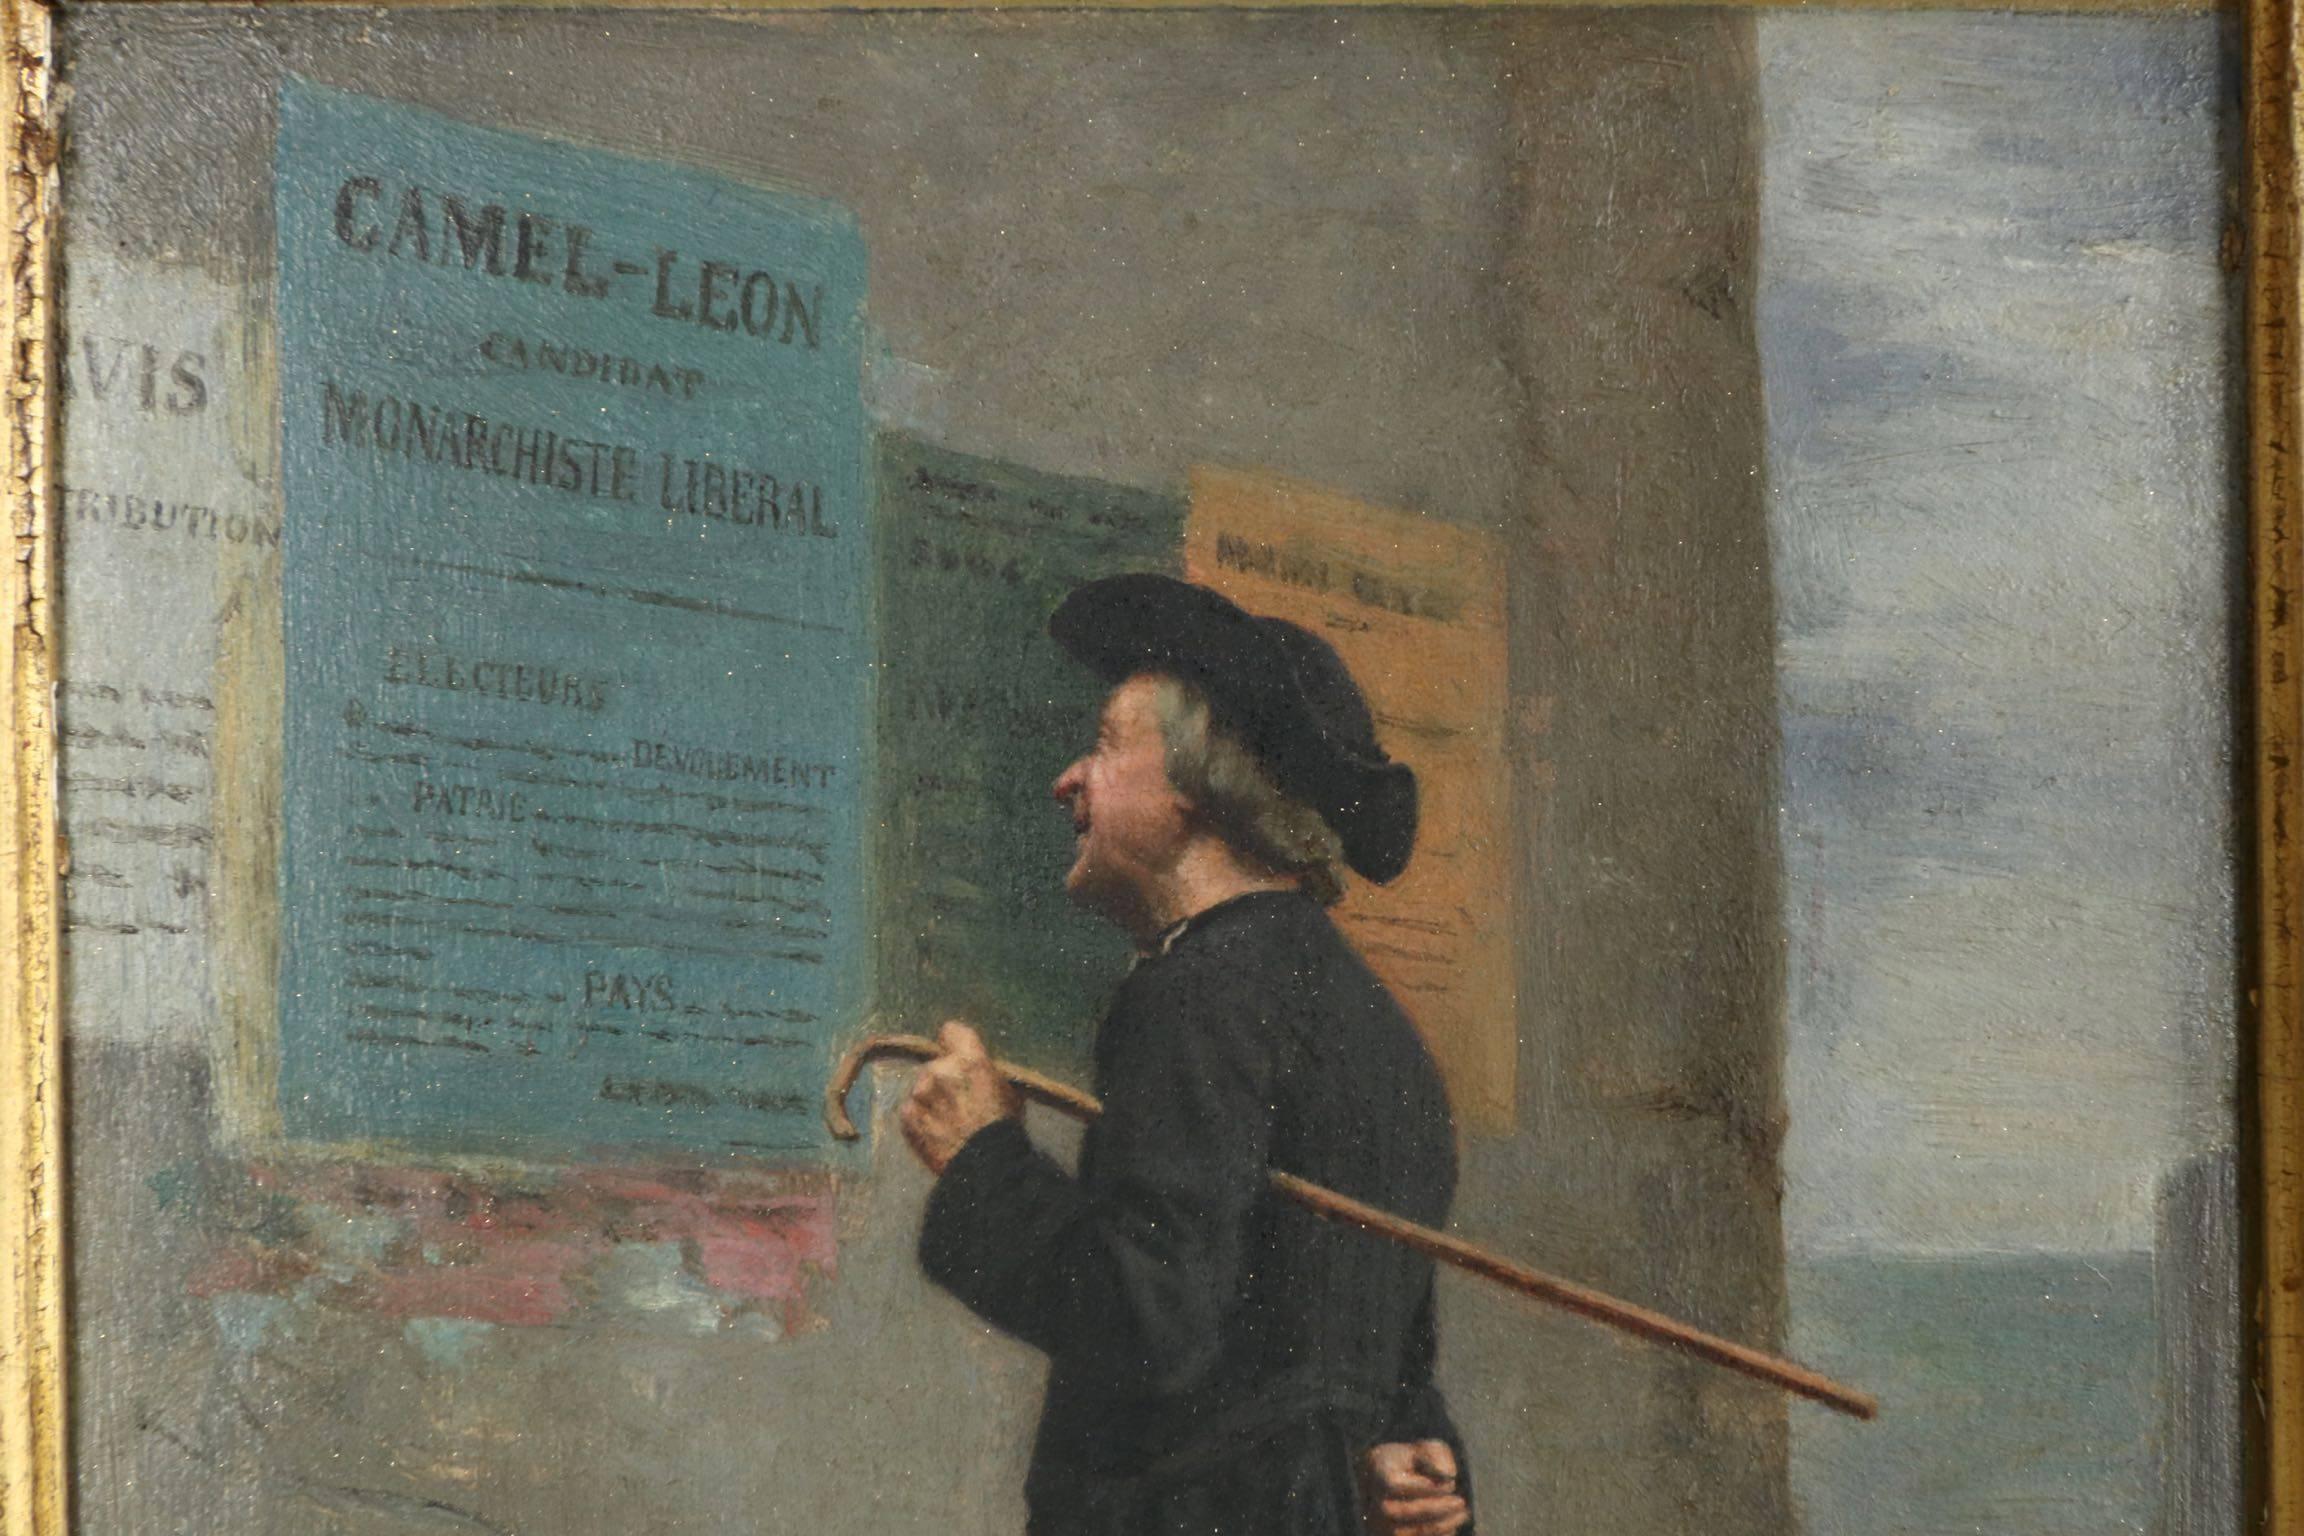 A humorous scene depicting a parish priest in his simple black garment studying the political posters affixed to the wall. The village around him is Stark, devoid of ornament leaving the lone figure as the focal point. With his hand is clasped